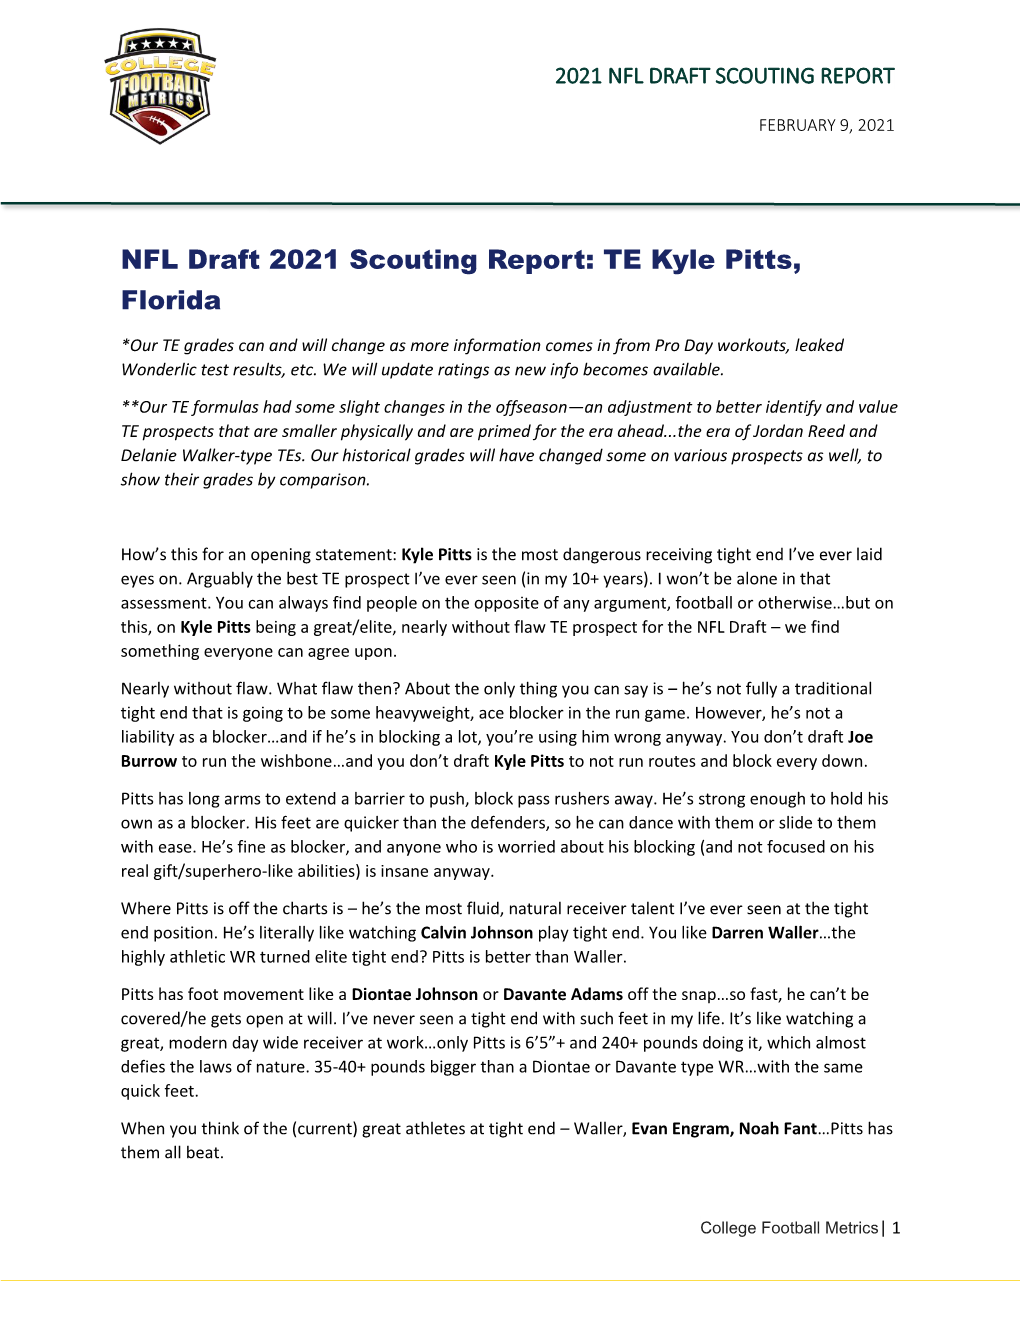 NFL Draft 2021 Scouting Report: TE Kyle Pitts, Florida